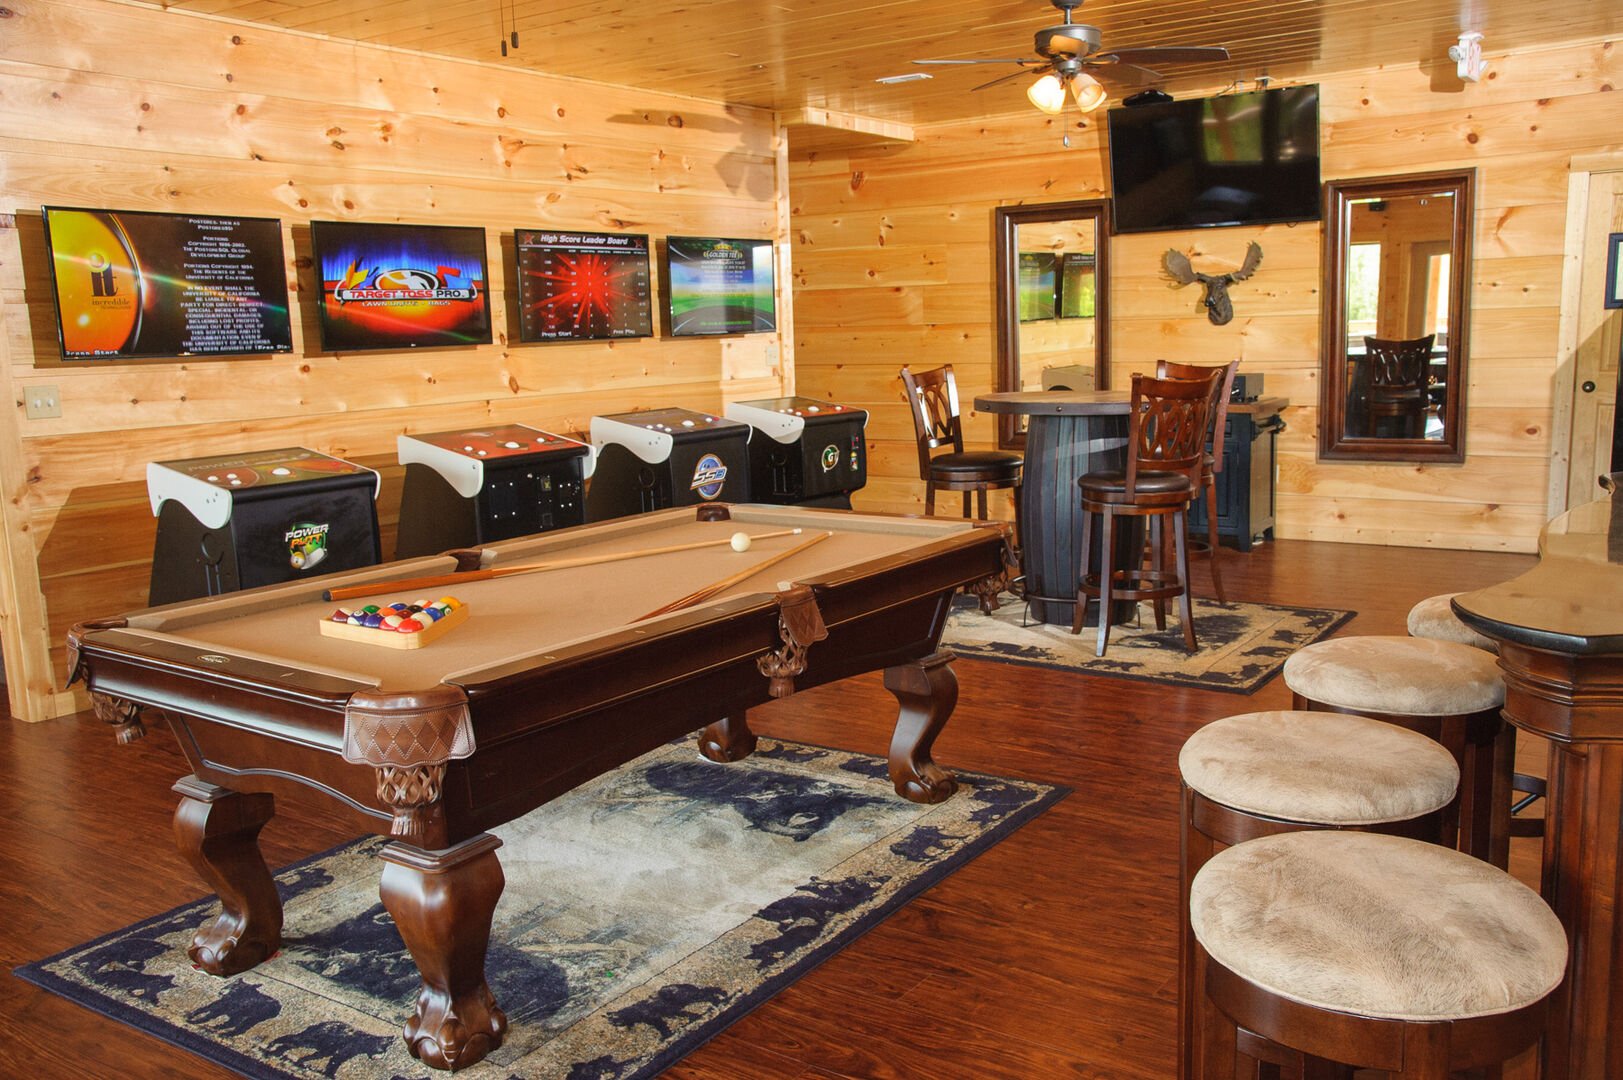 Pool Table, Table, Chairs, Game Tables, Stools, and TV.